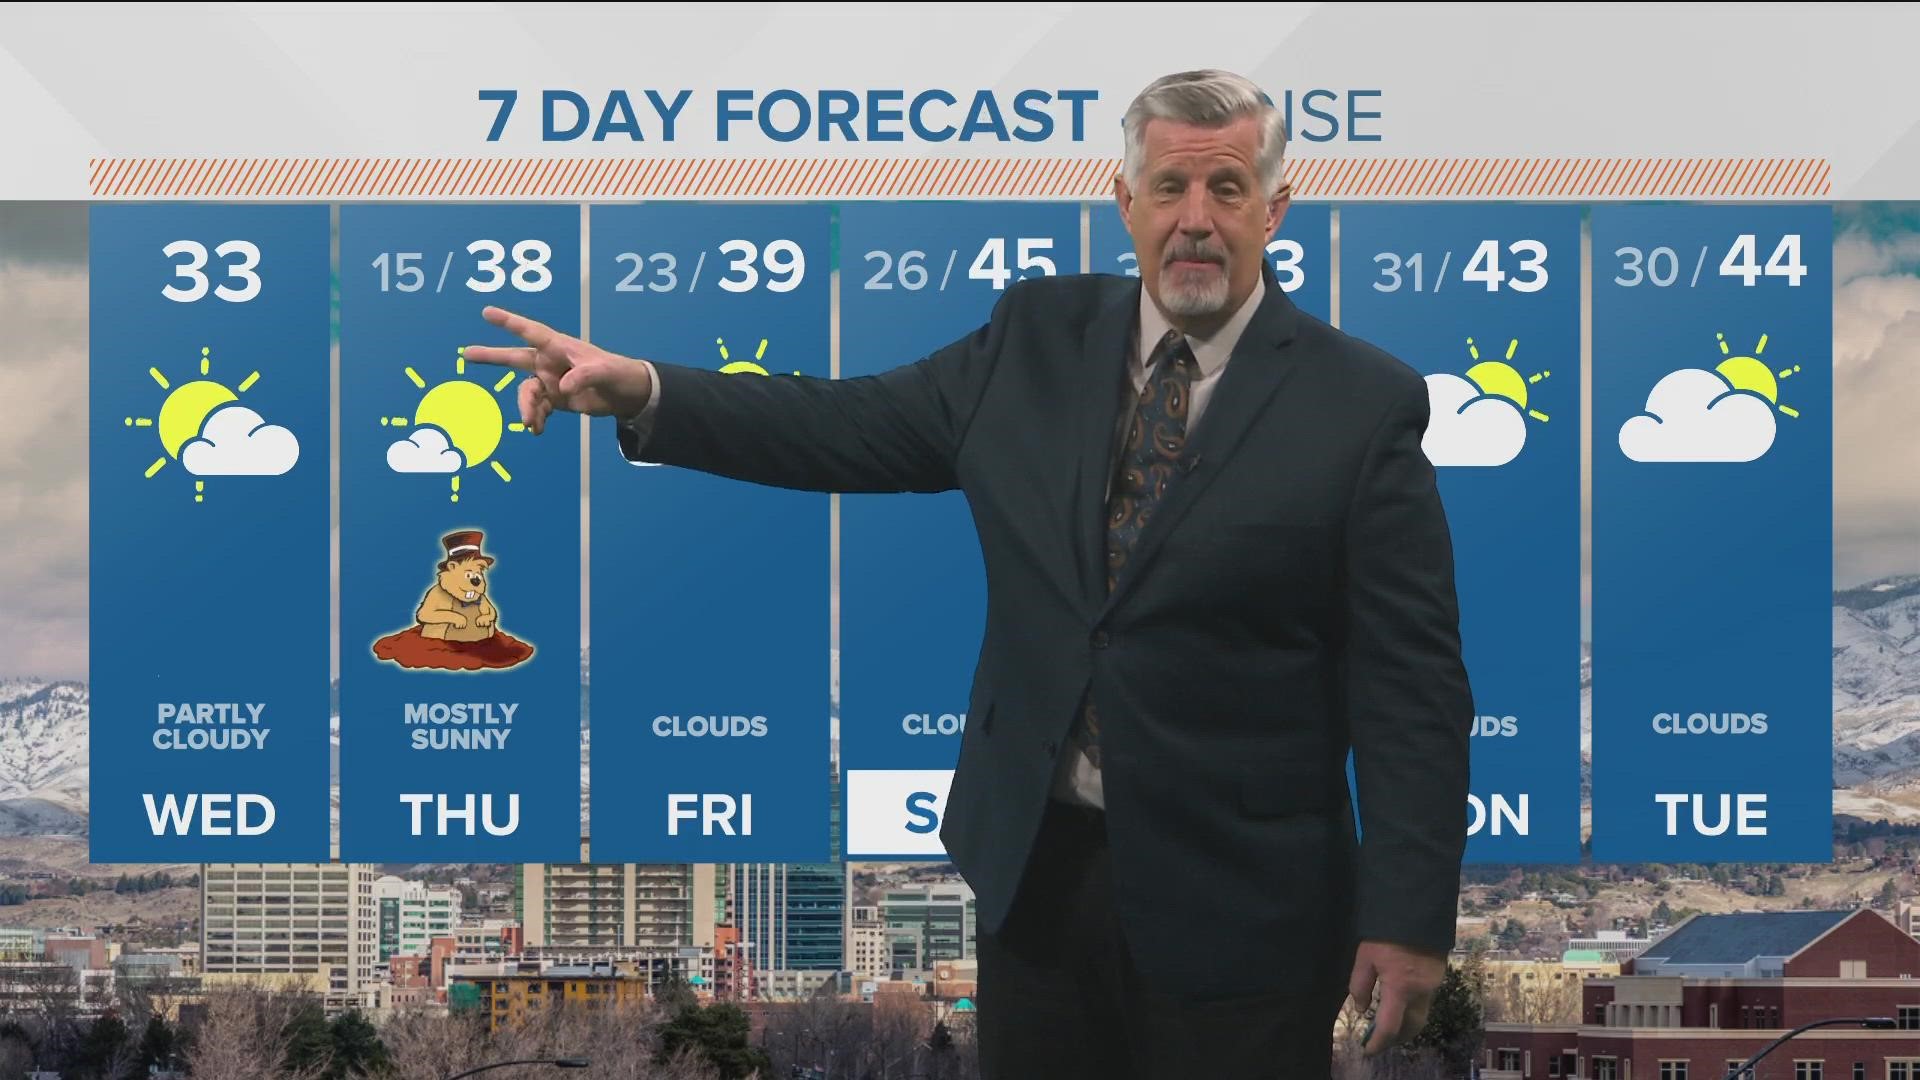 KTVB First Alert Weather Wednesday, Feb. 1, 2023, in Boise, Idaho, with meteorologist Jim Duthie.